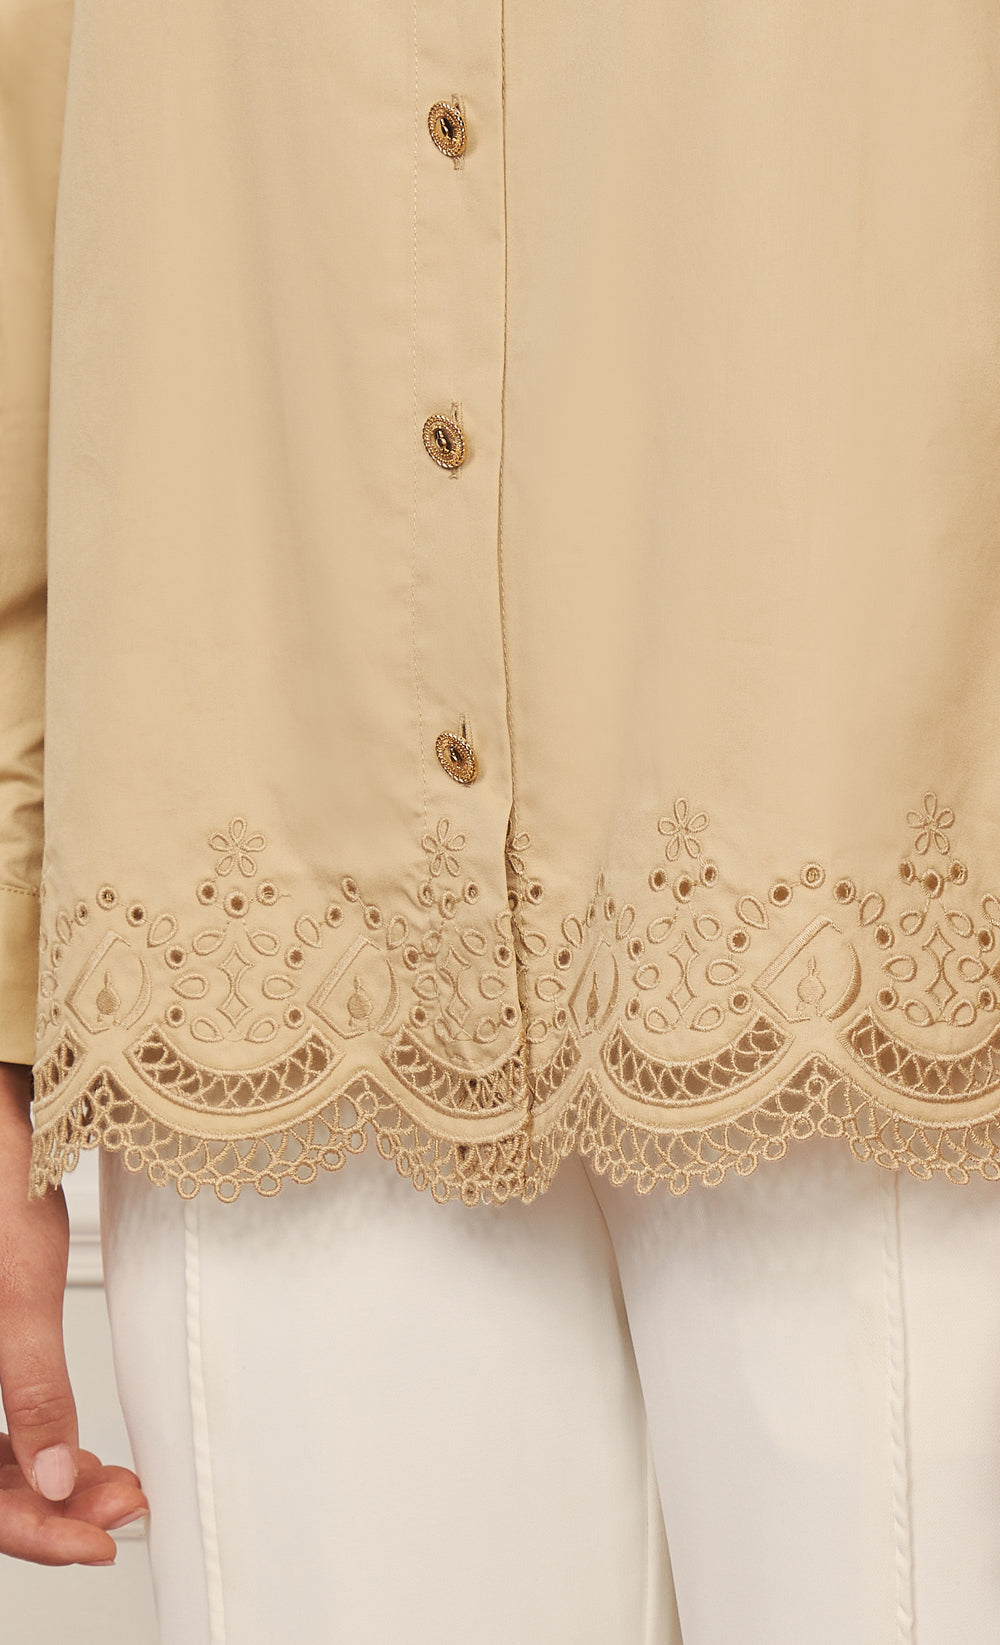 Rianna Shirt with D Monogram Lace in Beige